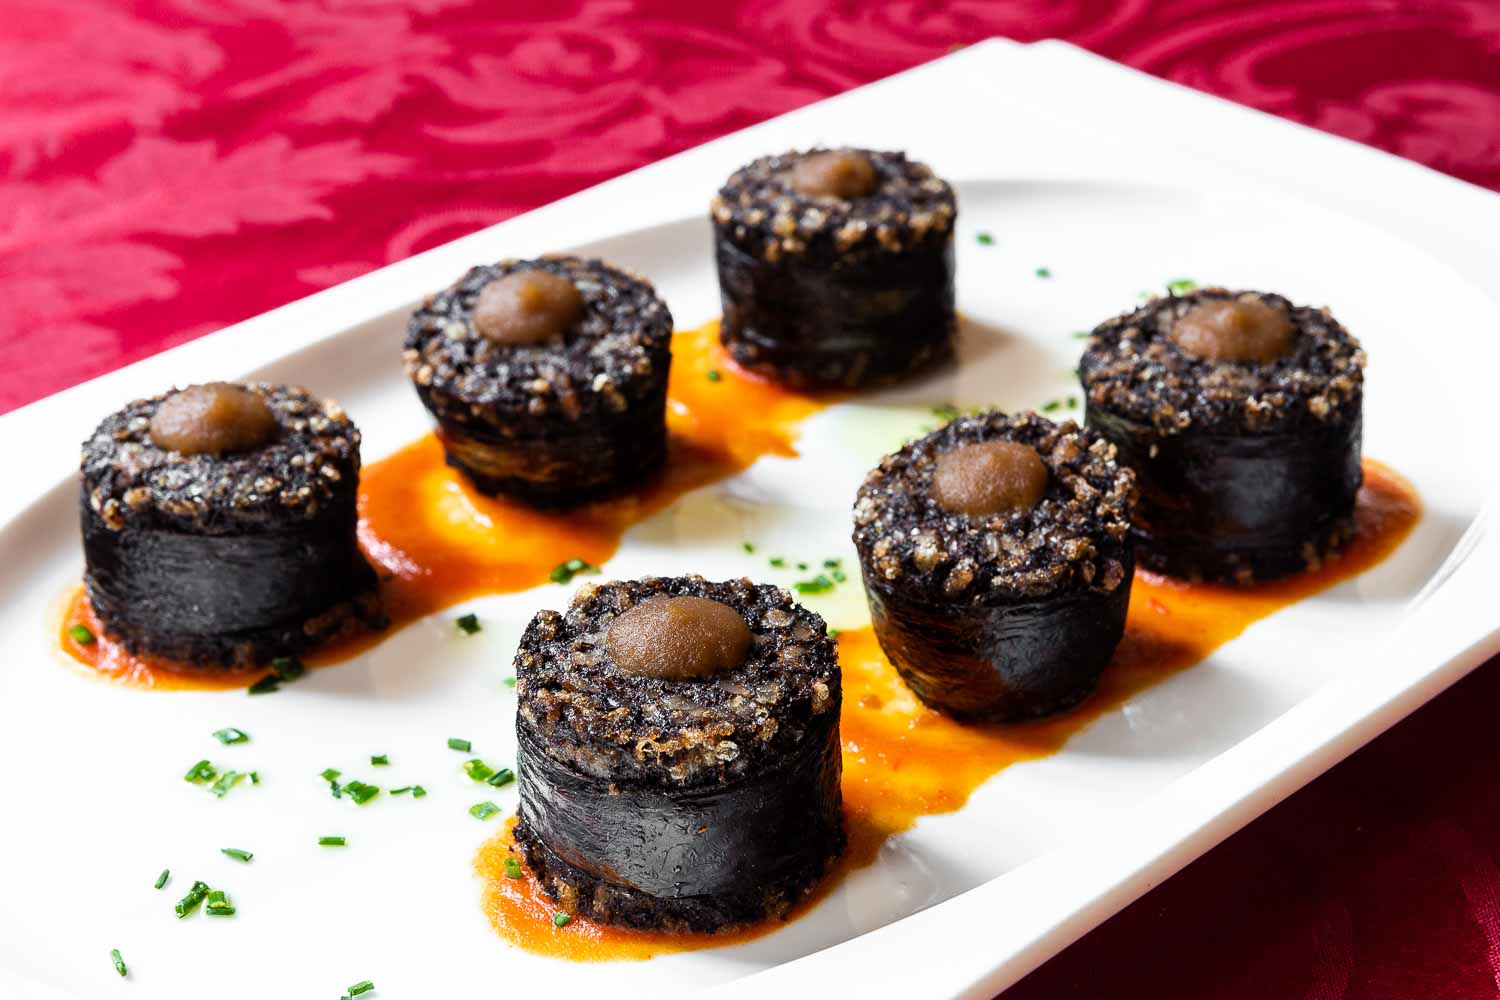 Morcilla de Burgos skewer and piquillos with candied apple